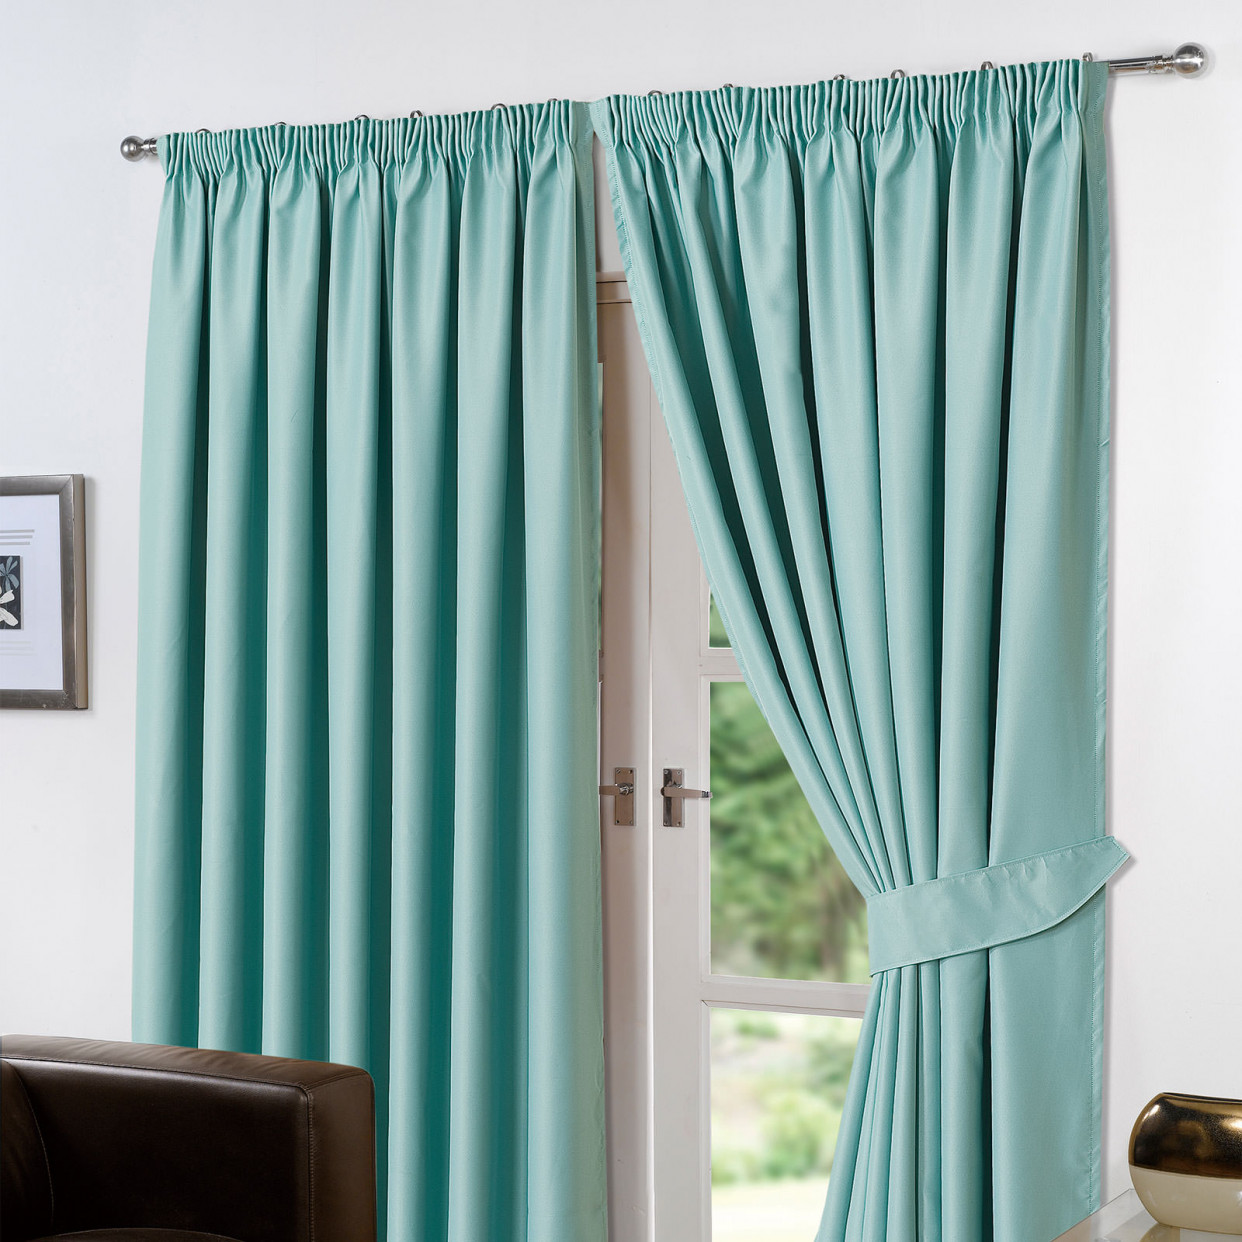 Thermal Pencil Pleat Blackout PAIR Curtains Ready Made Fully Lined - Aqua 66x90>